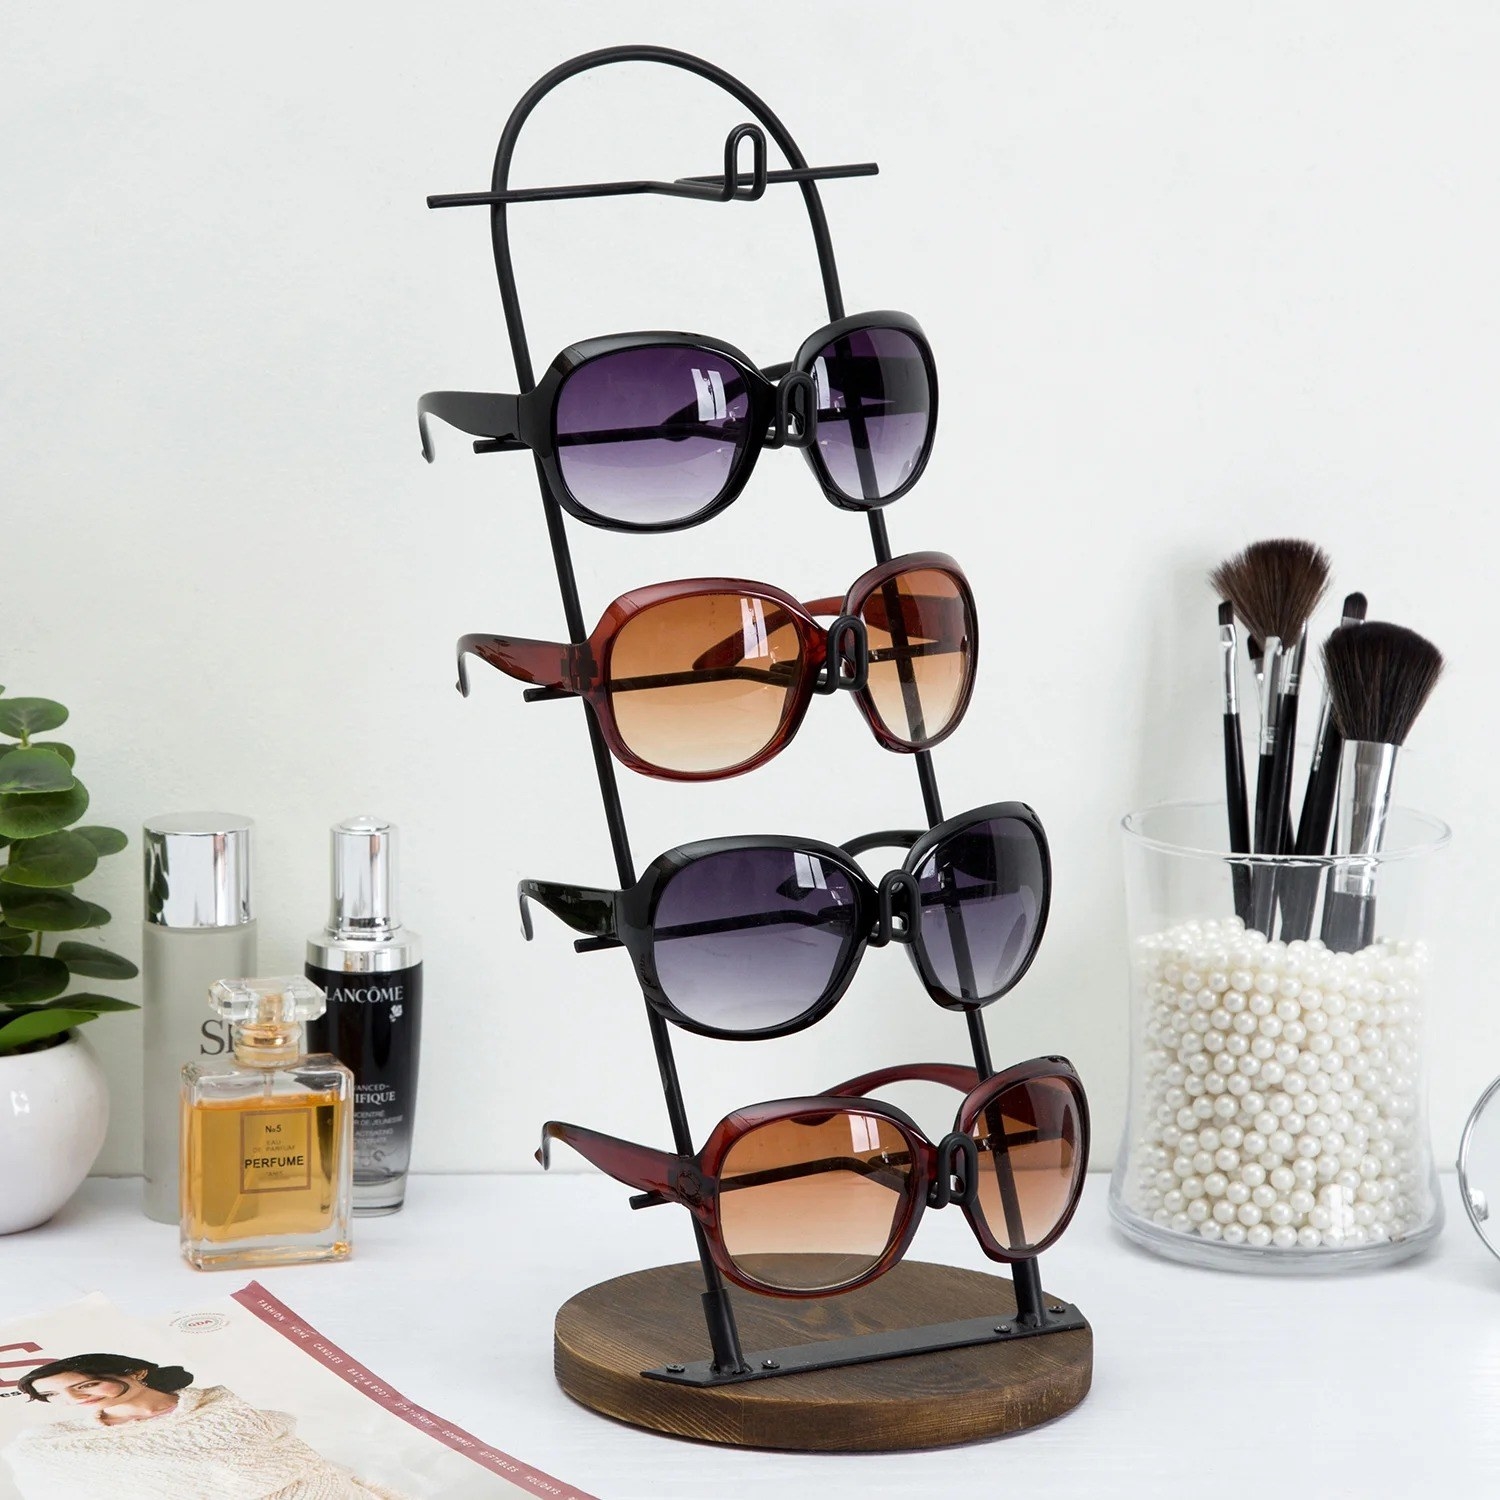 the sunglasses organizer with sunglasses on it